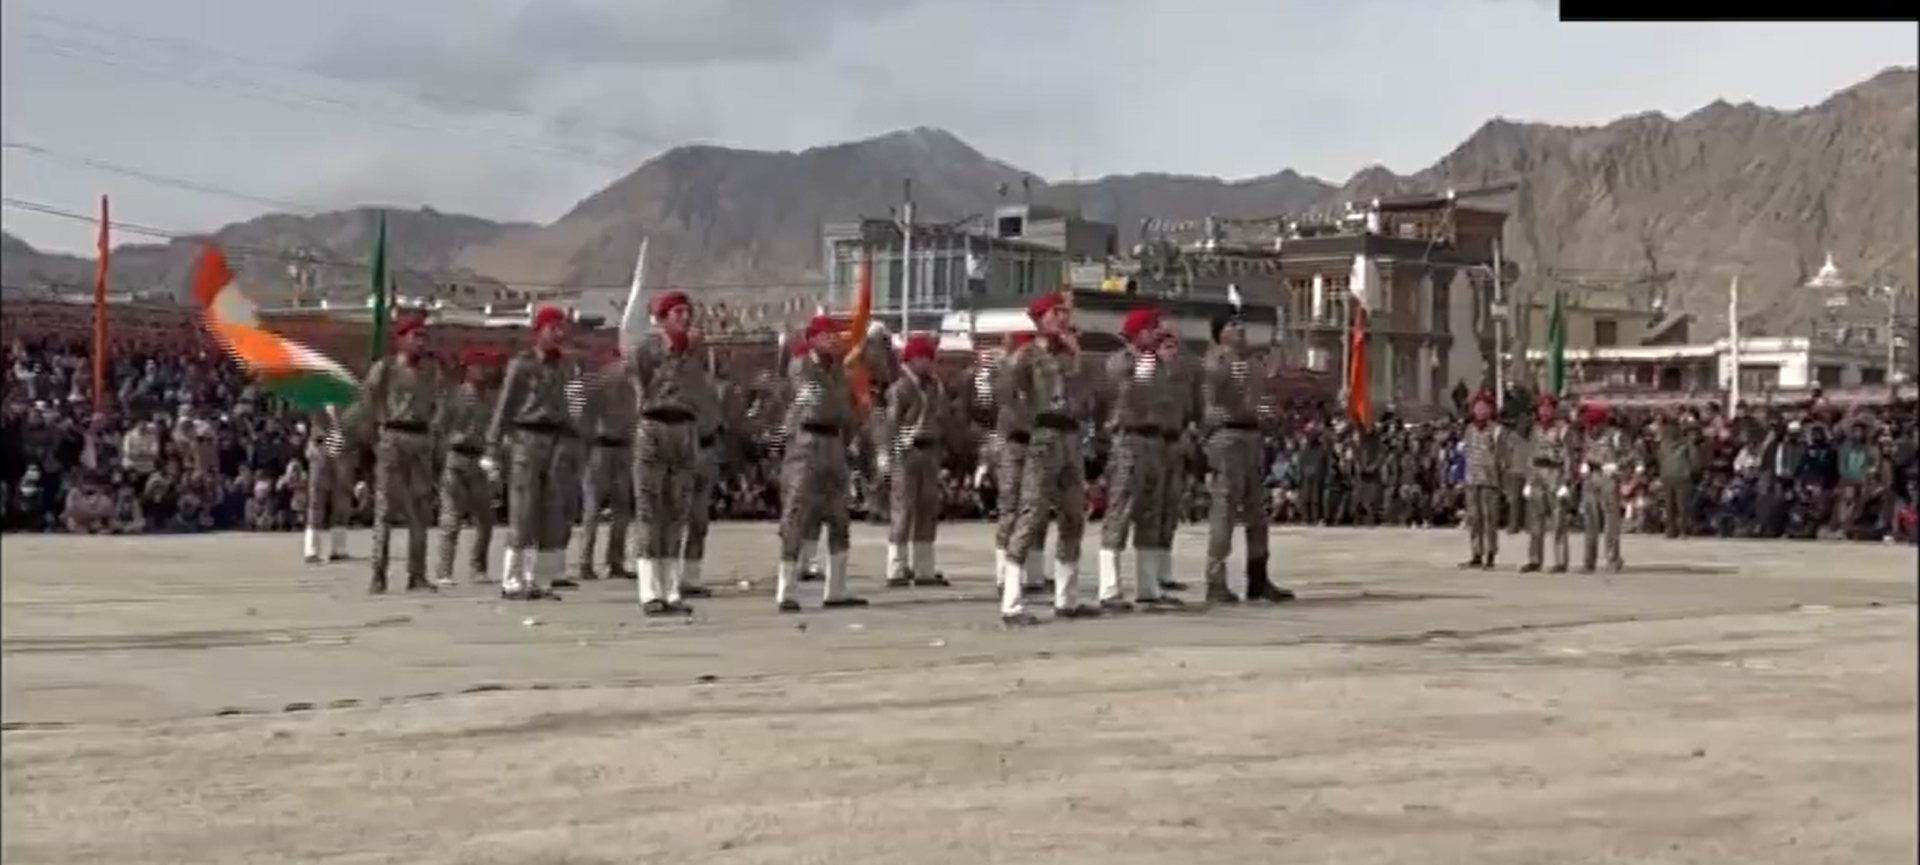 75th Republic Day celebrations held at Polo Ground in Ladakh's Leh